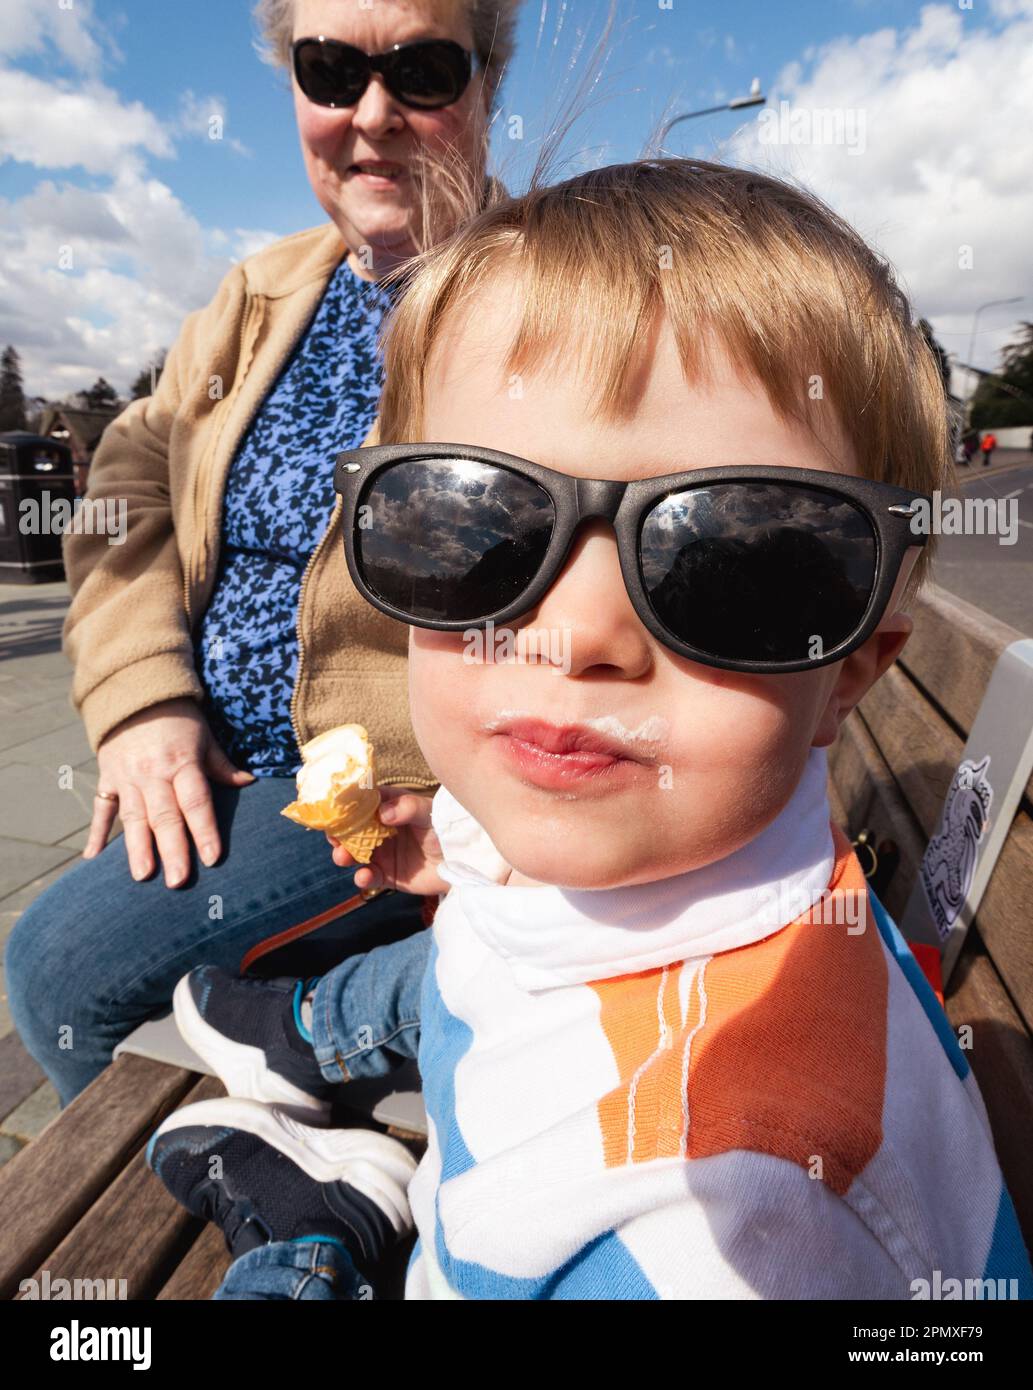 Cumbria, UK. 15th Apr, 2023. 15th April  2023 .UK Cumbria Weather Sunny afternoon at Bowness Bay on Lake Windermere brings out the tourists for boat trips & ice creams  Credit: Gordon Shoosmith/ Live News Credit: Gordon Shoosmith/Alamy Live News Stock Photo